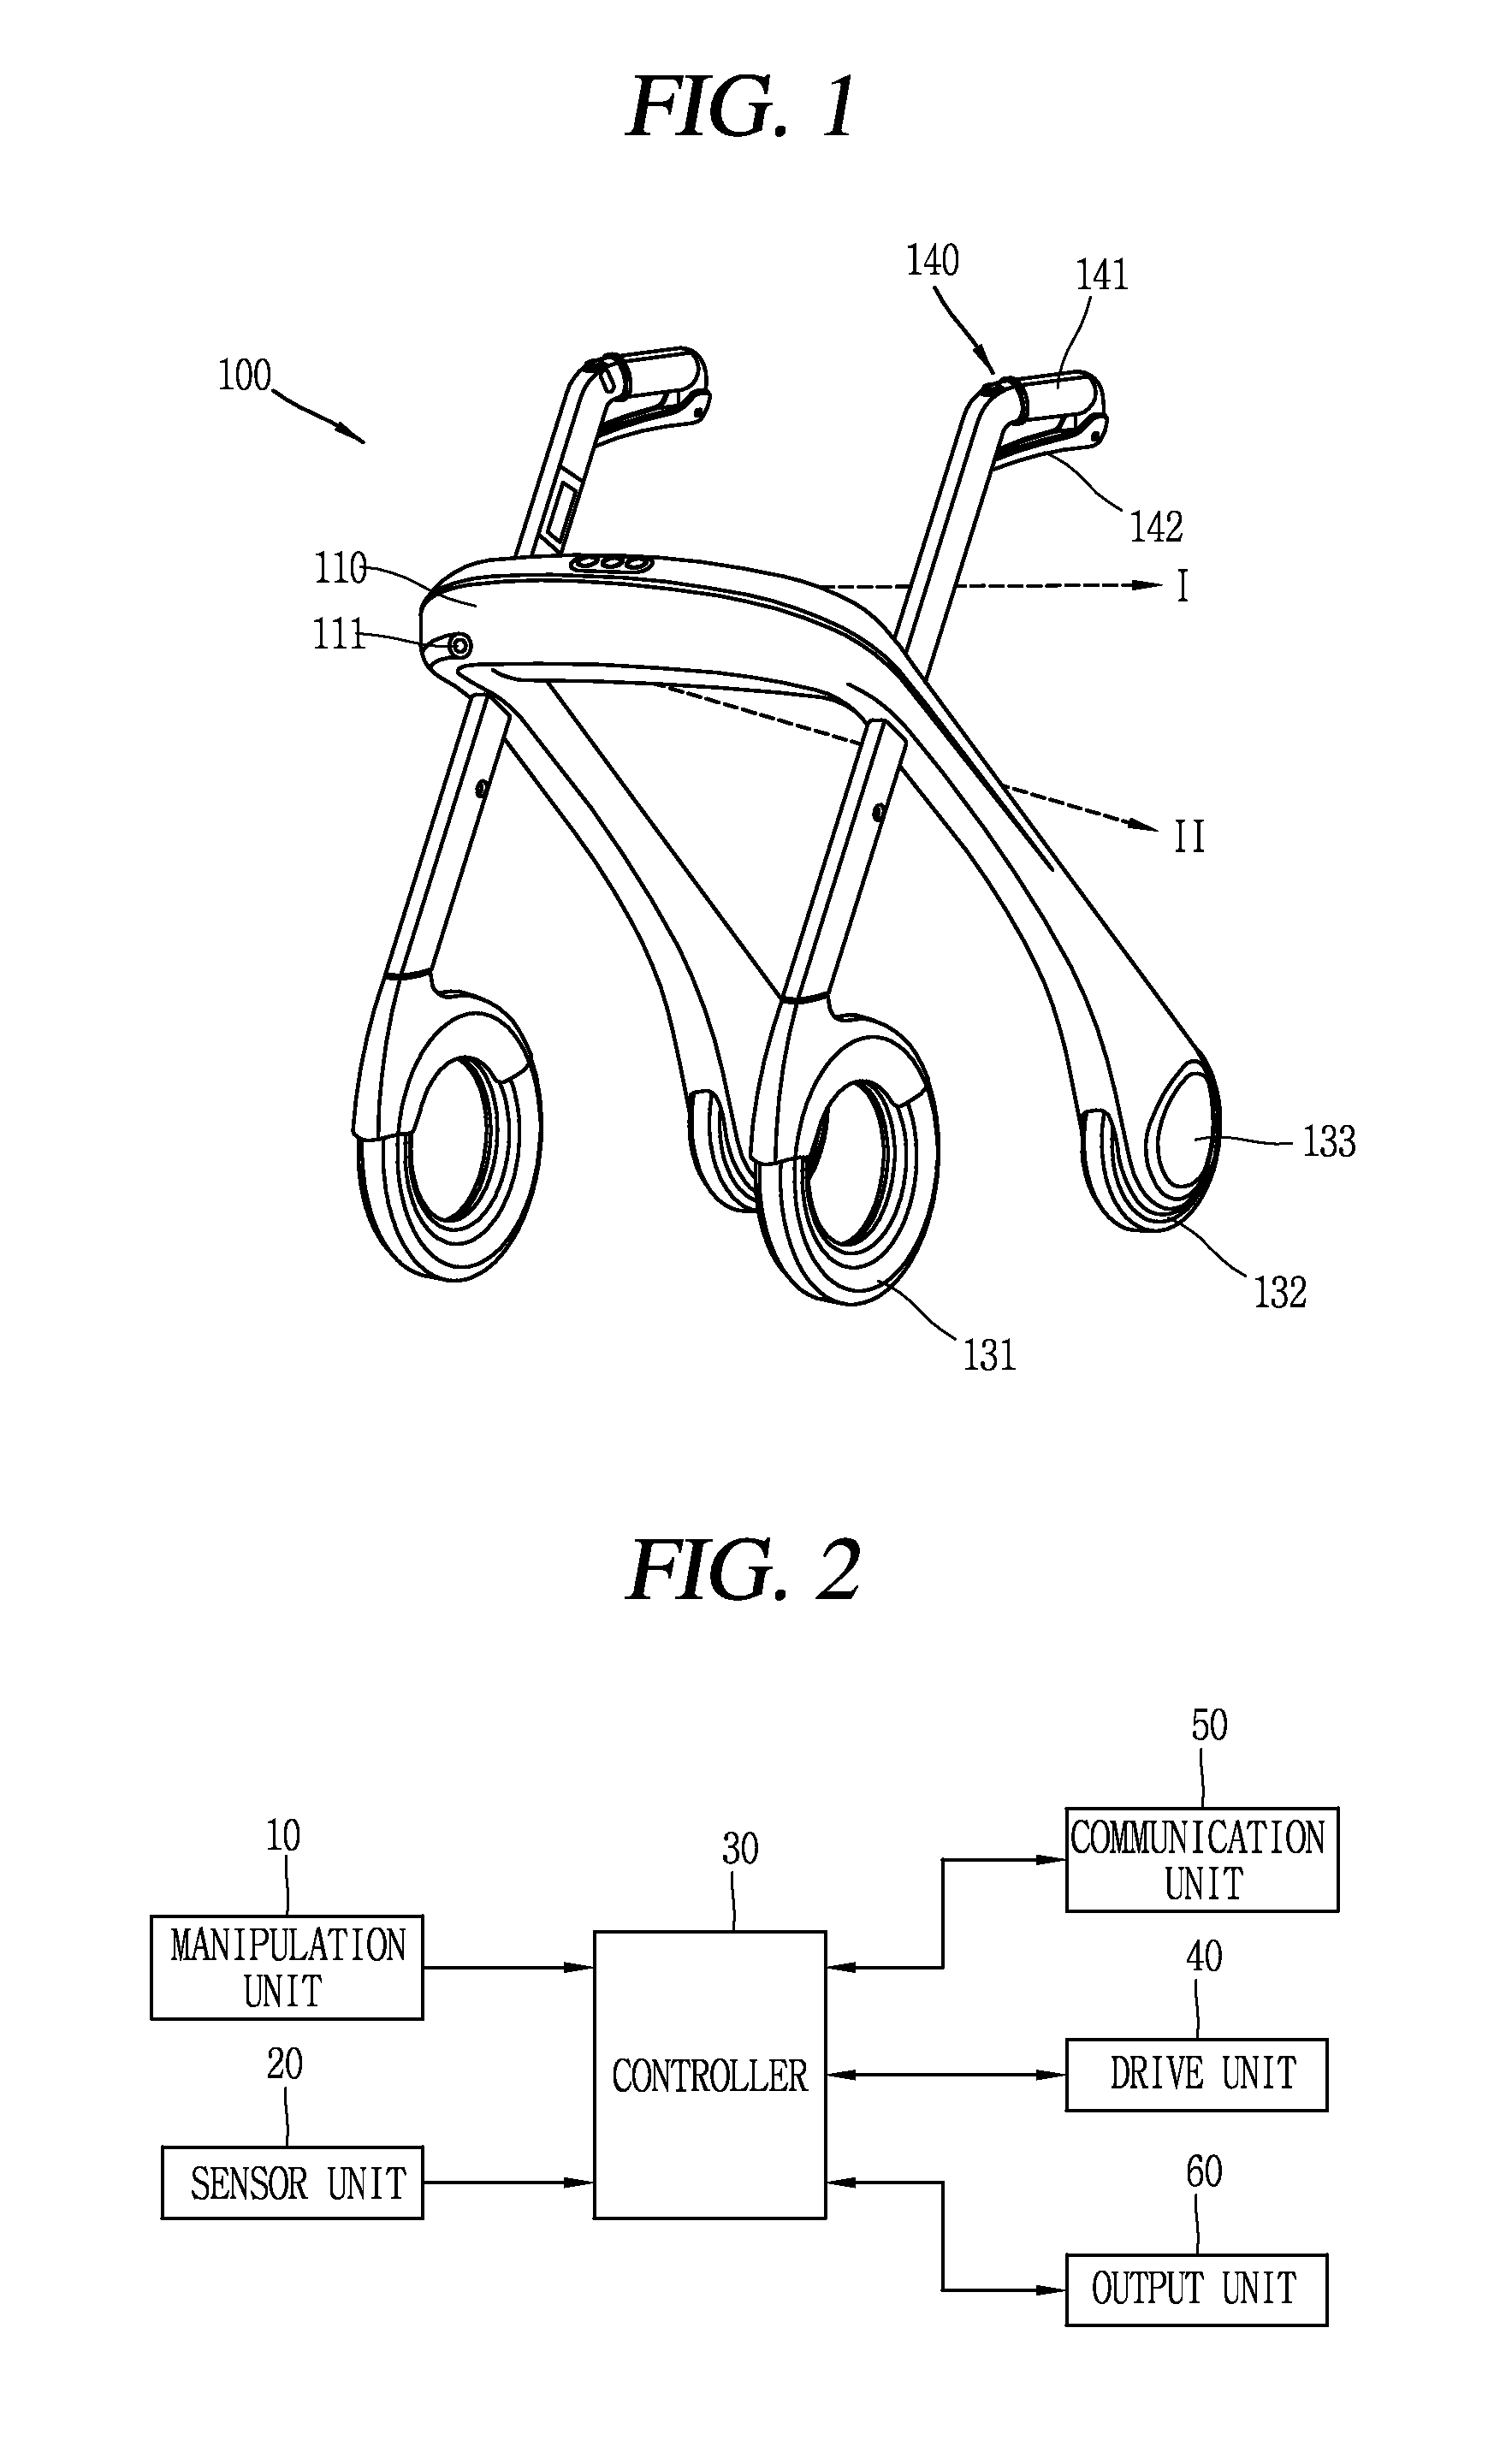 Electric walking assistant device